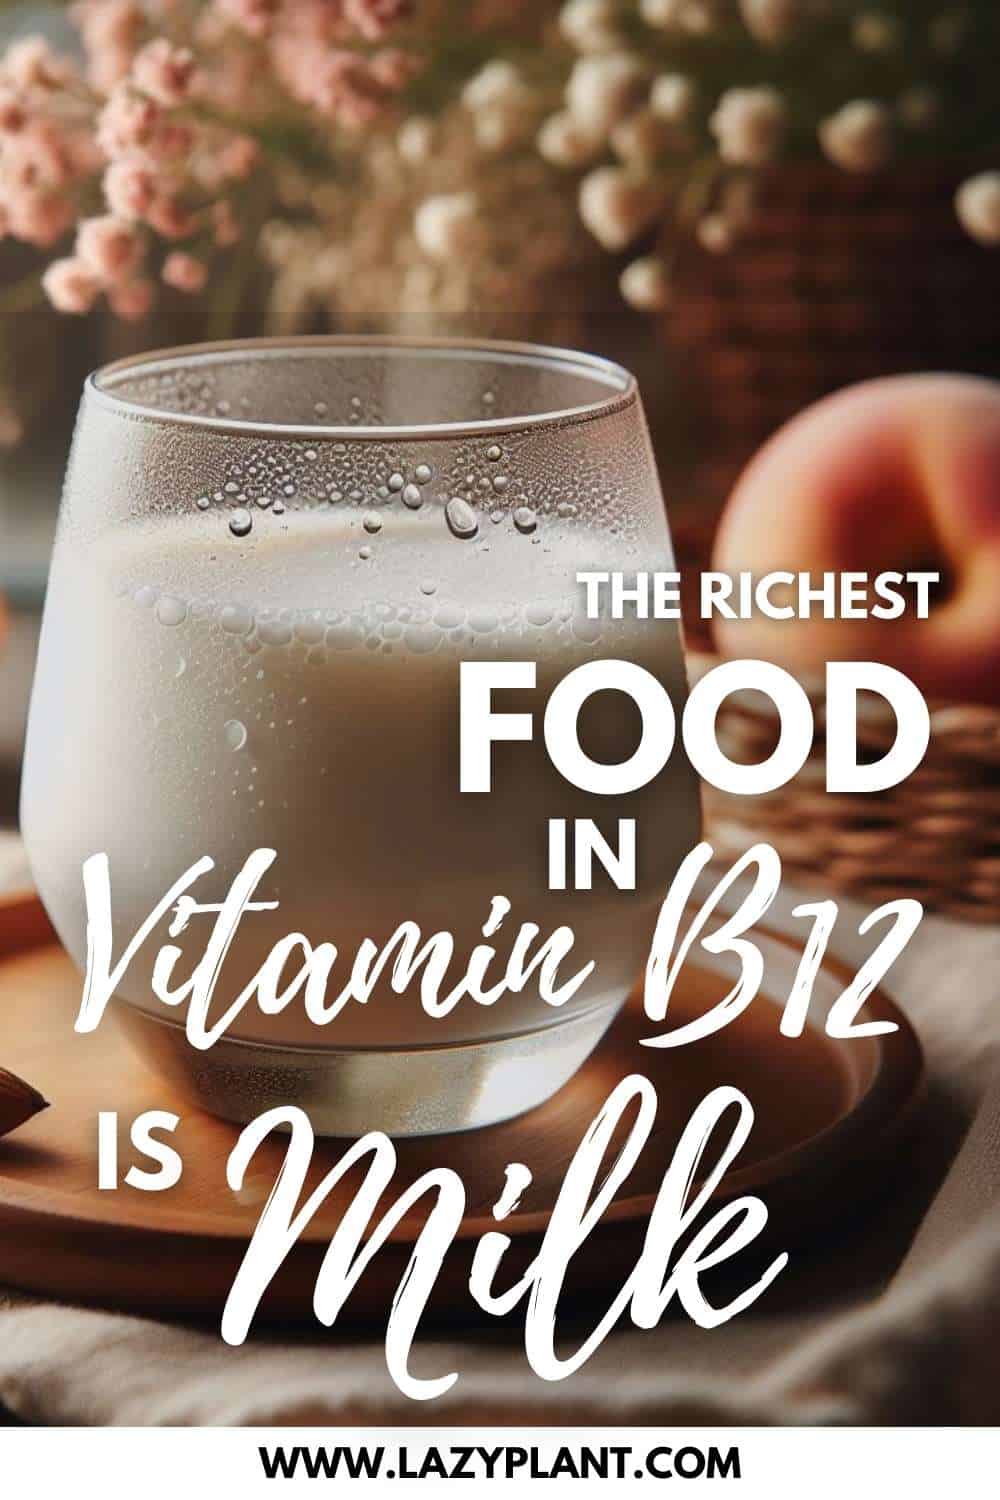 Milk & most dairy products are the richest foods in Vitamin B12.